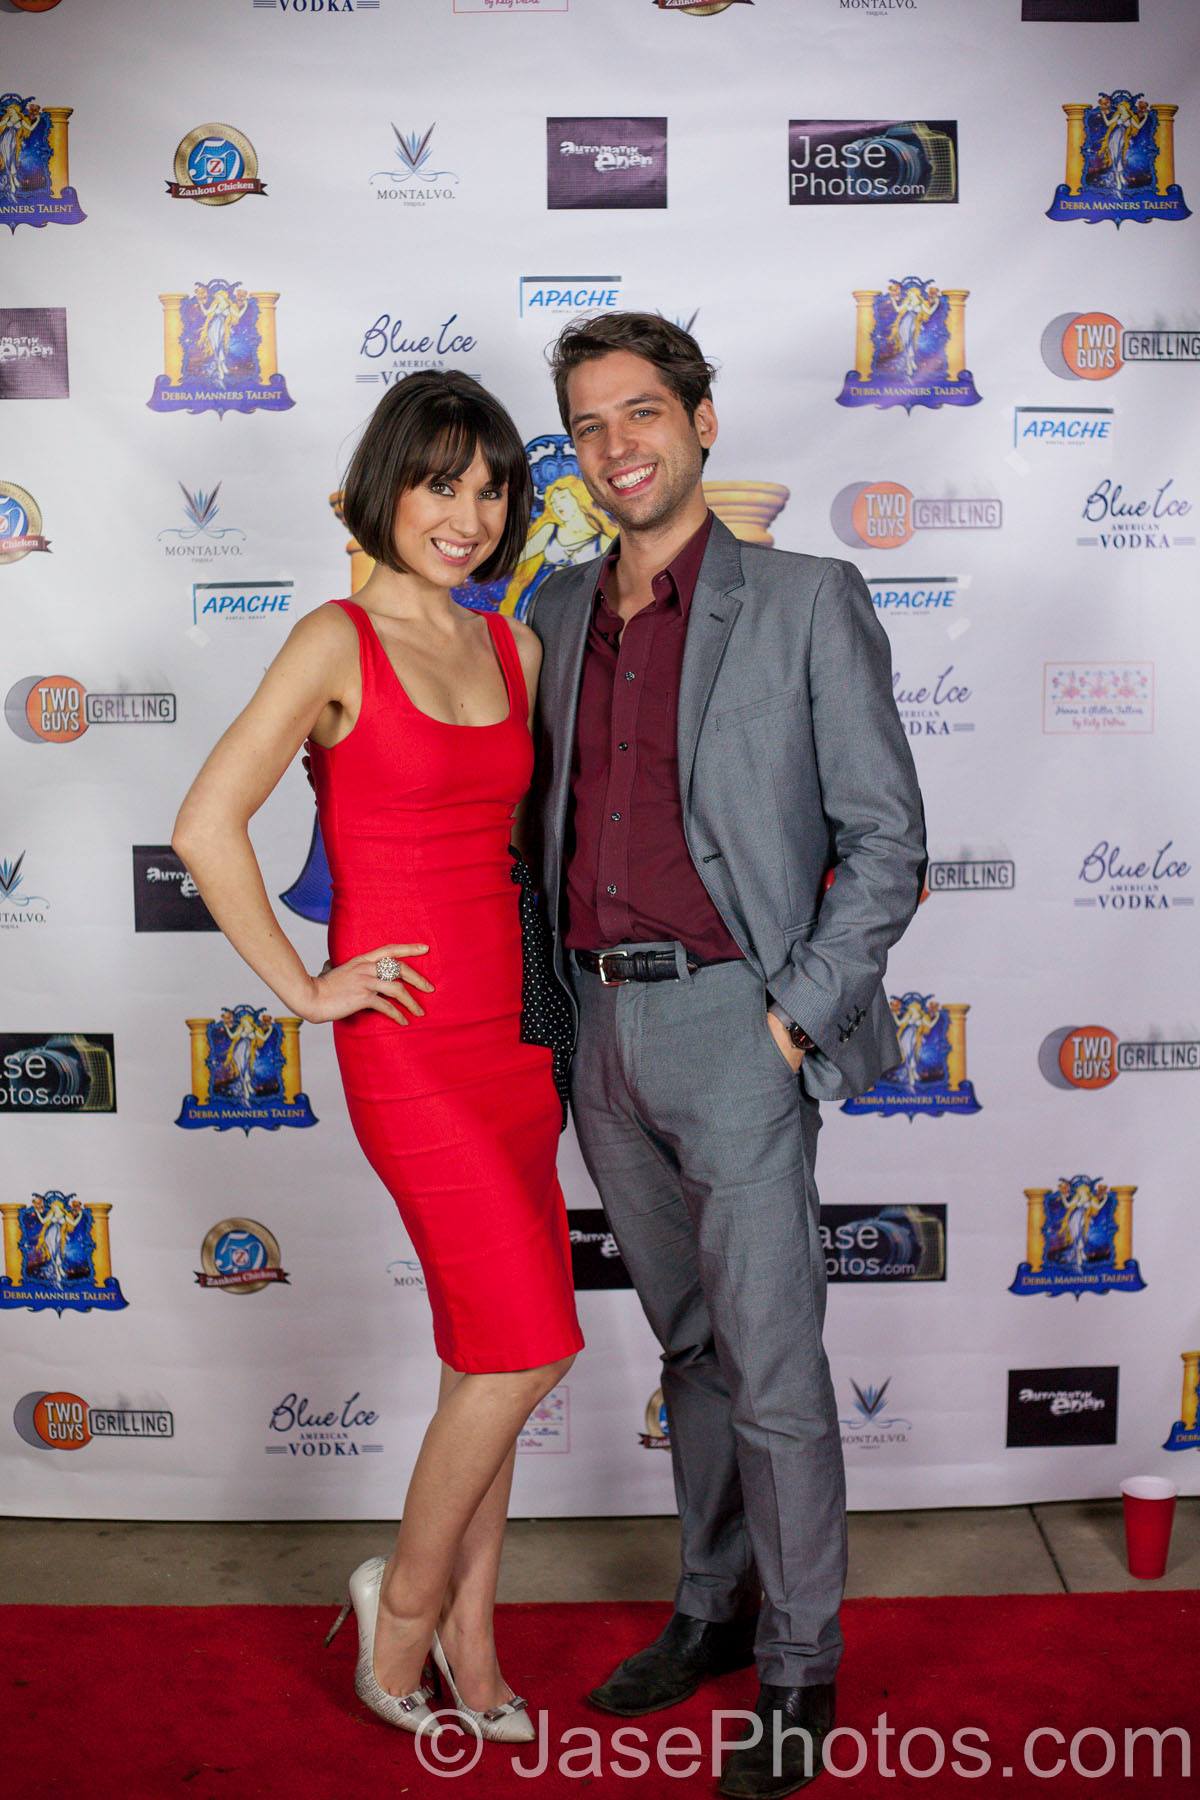 On the red carpet of the DMTA Valentine's party